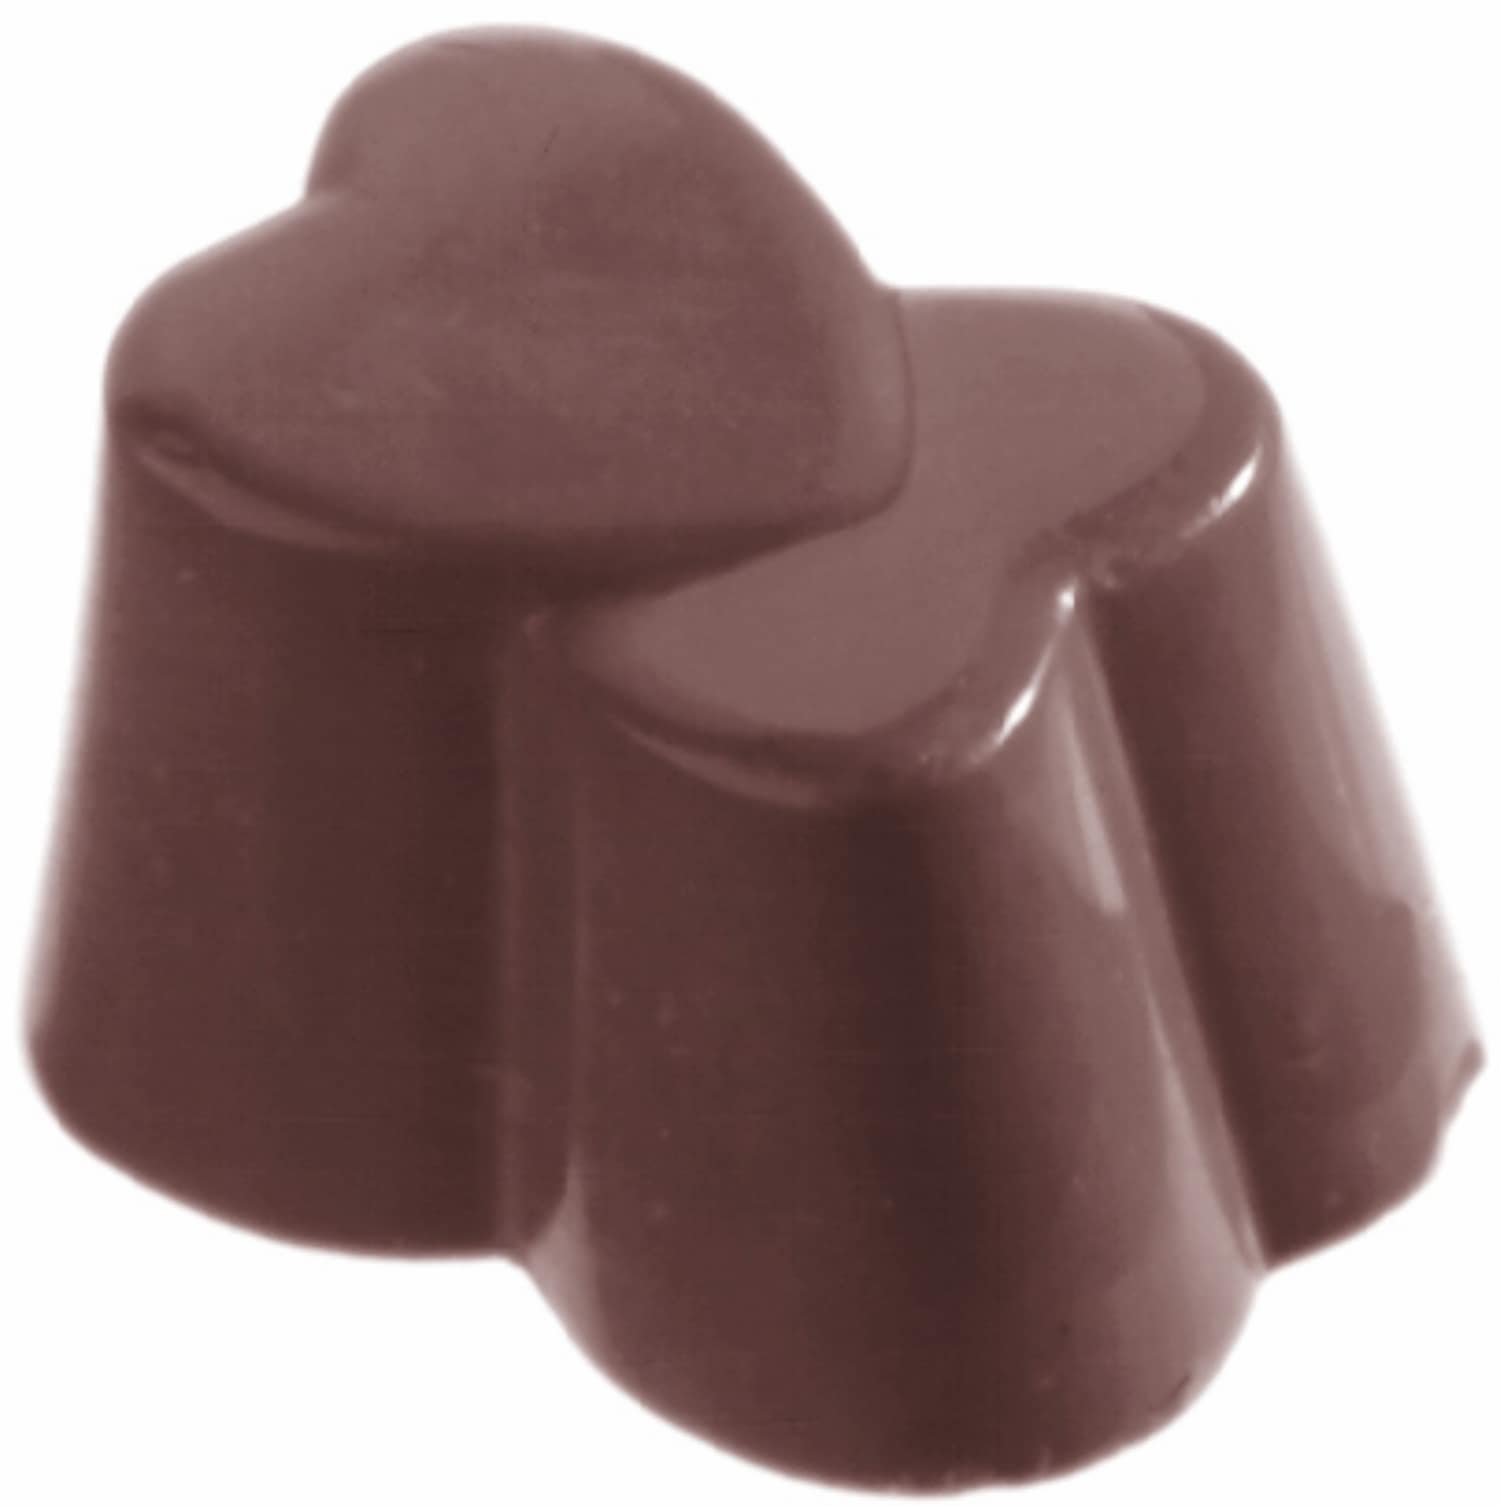 Chocolate mould "heart" 421216